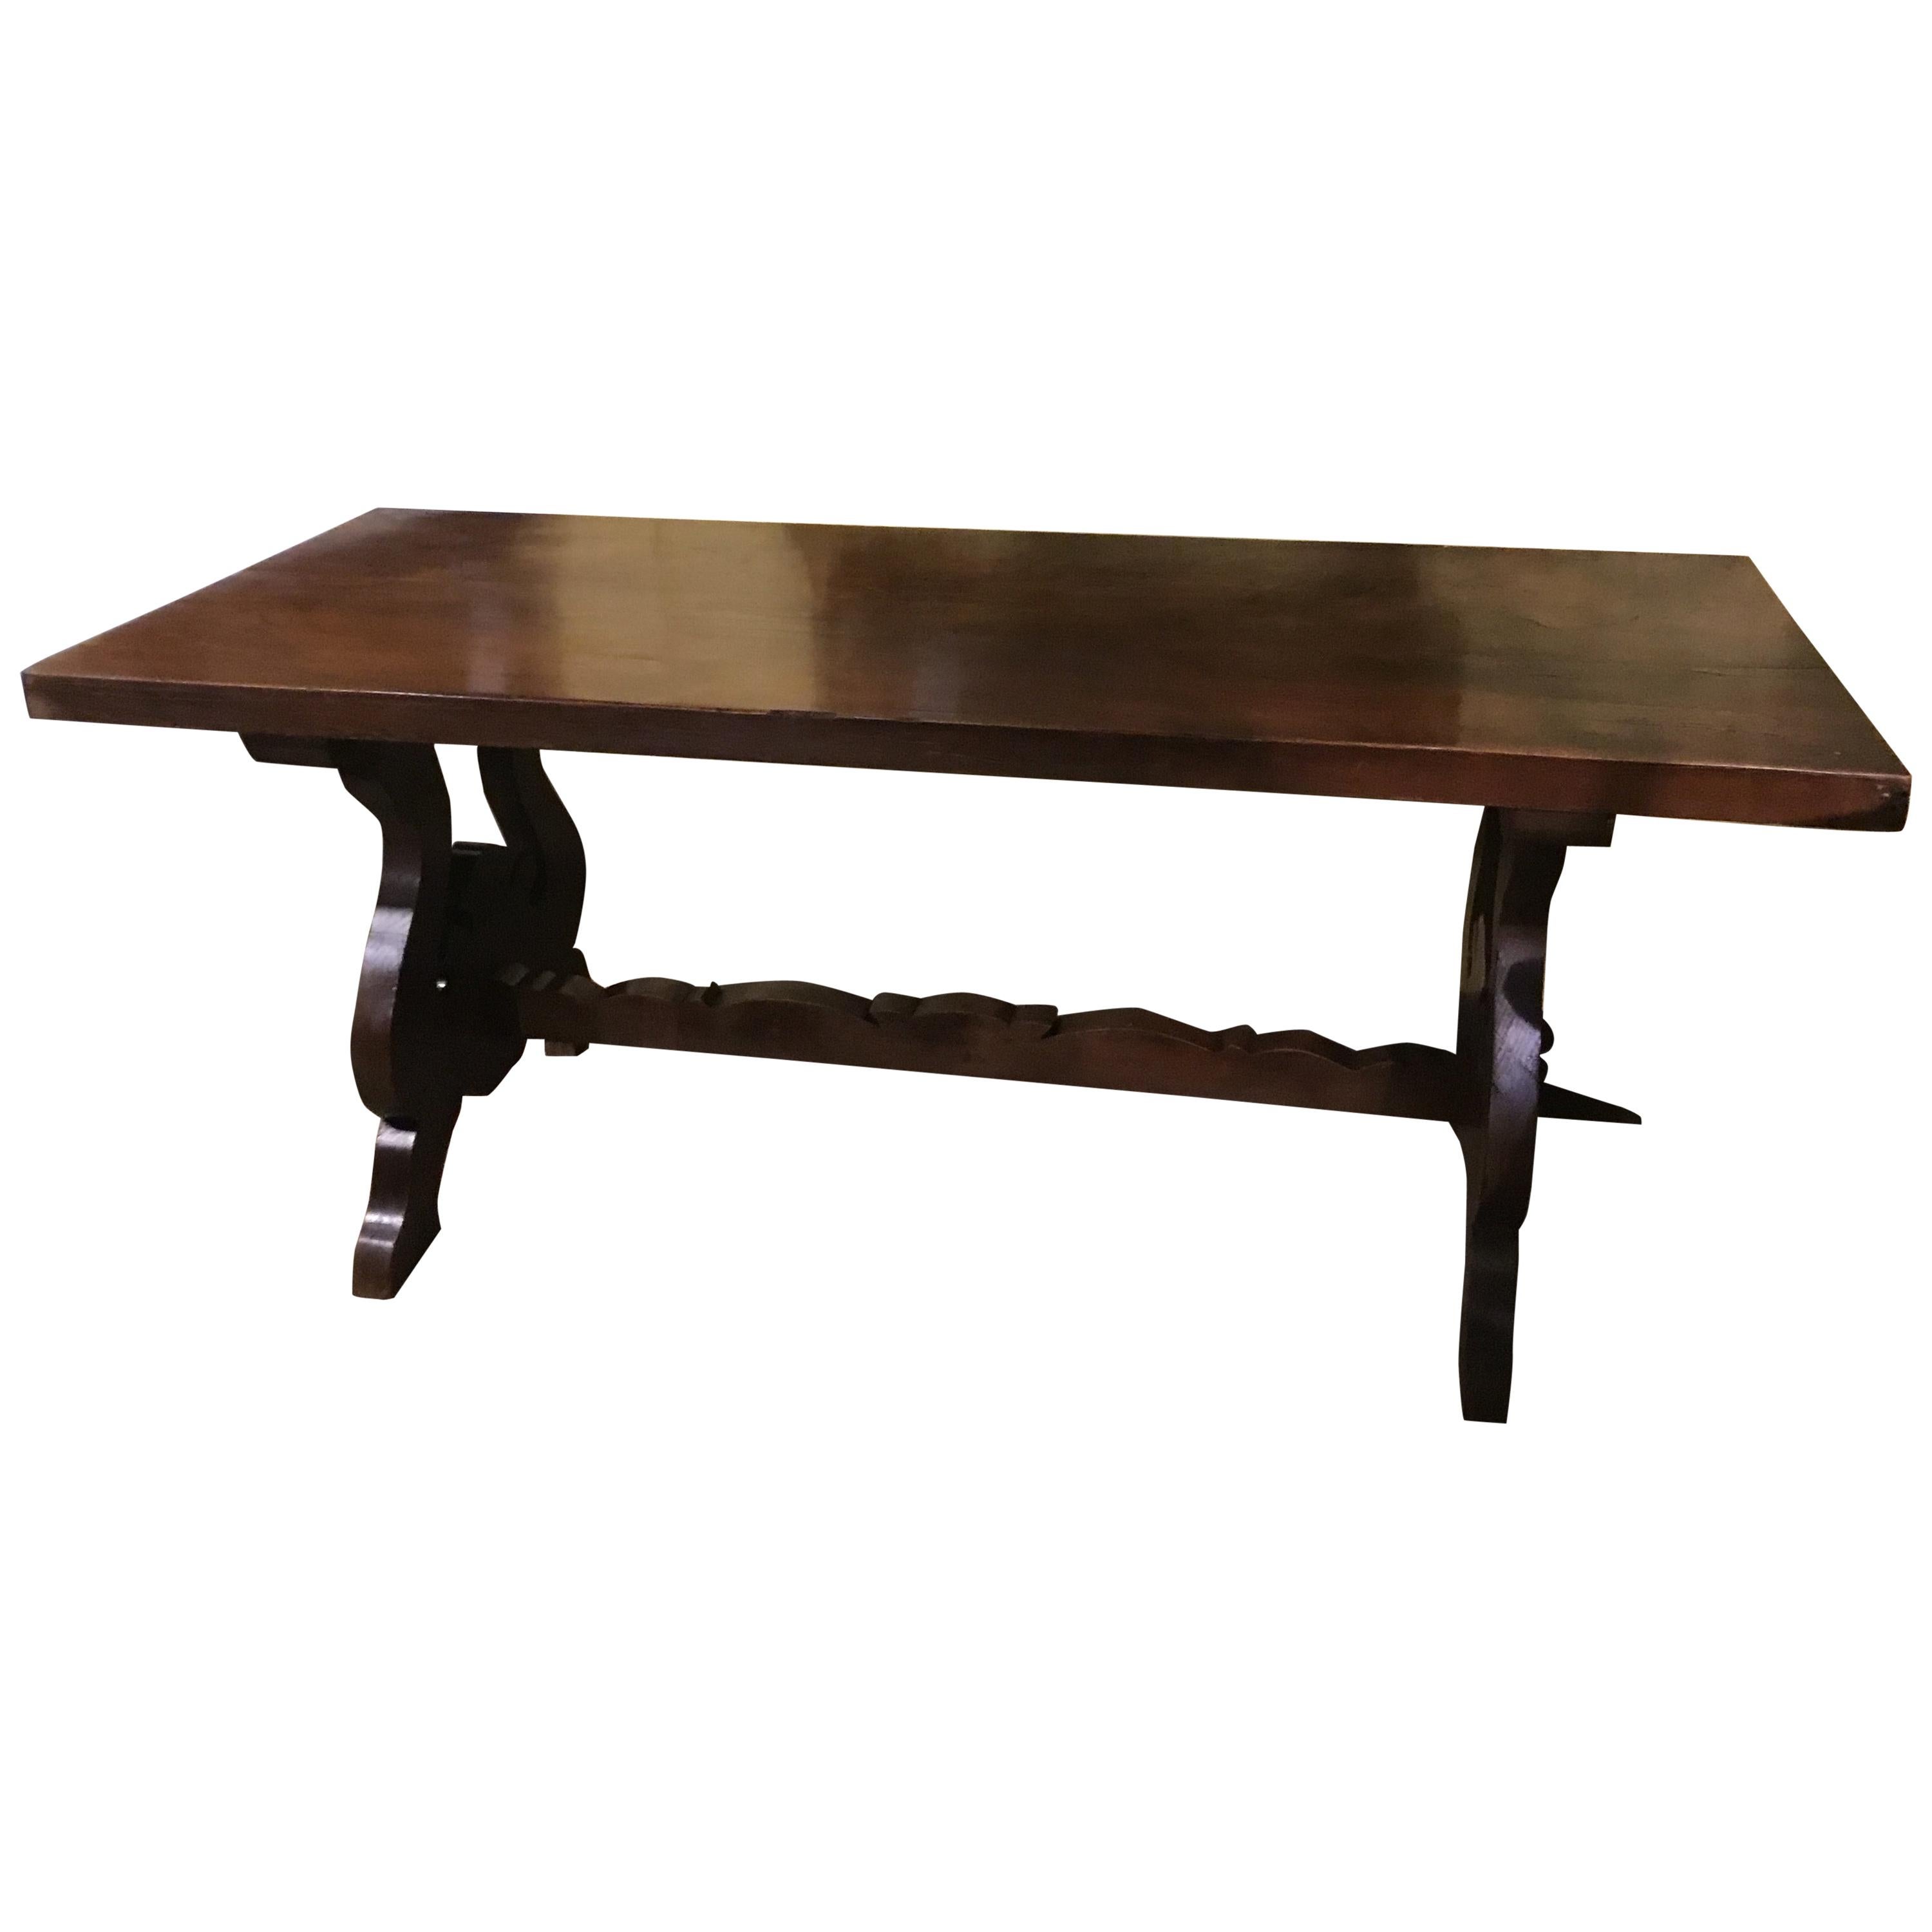 Rustic Spanish Refectory Table Early 19th Century with Ox Bow Carved Ends Walnut For Sale